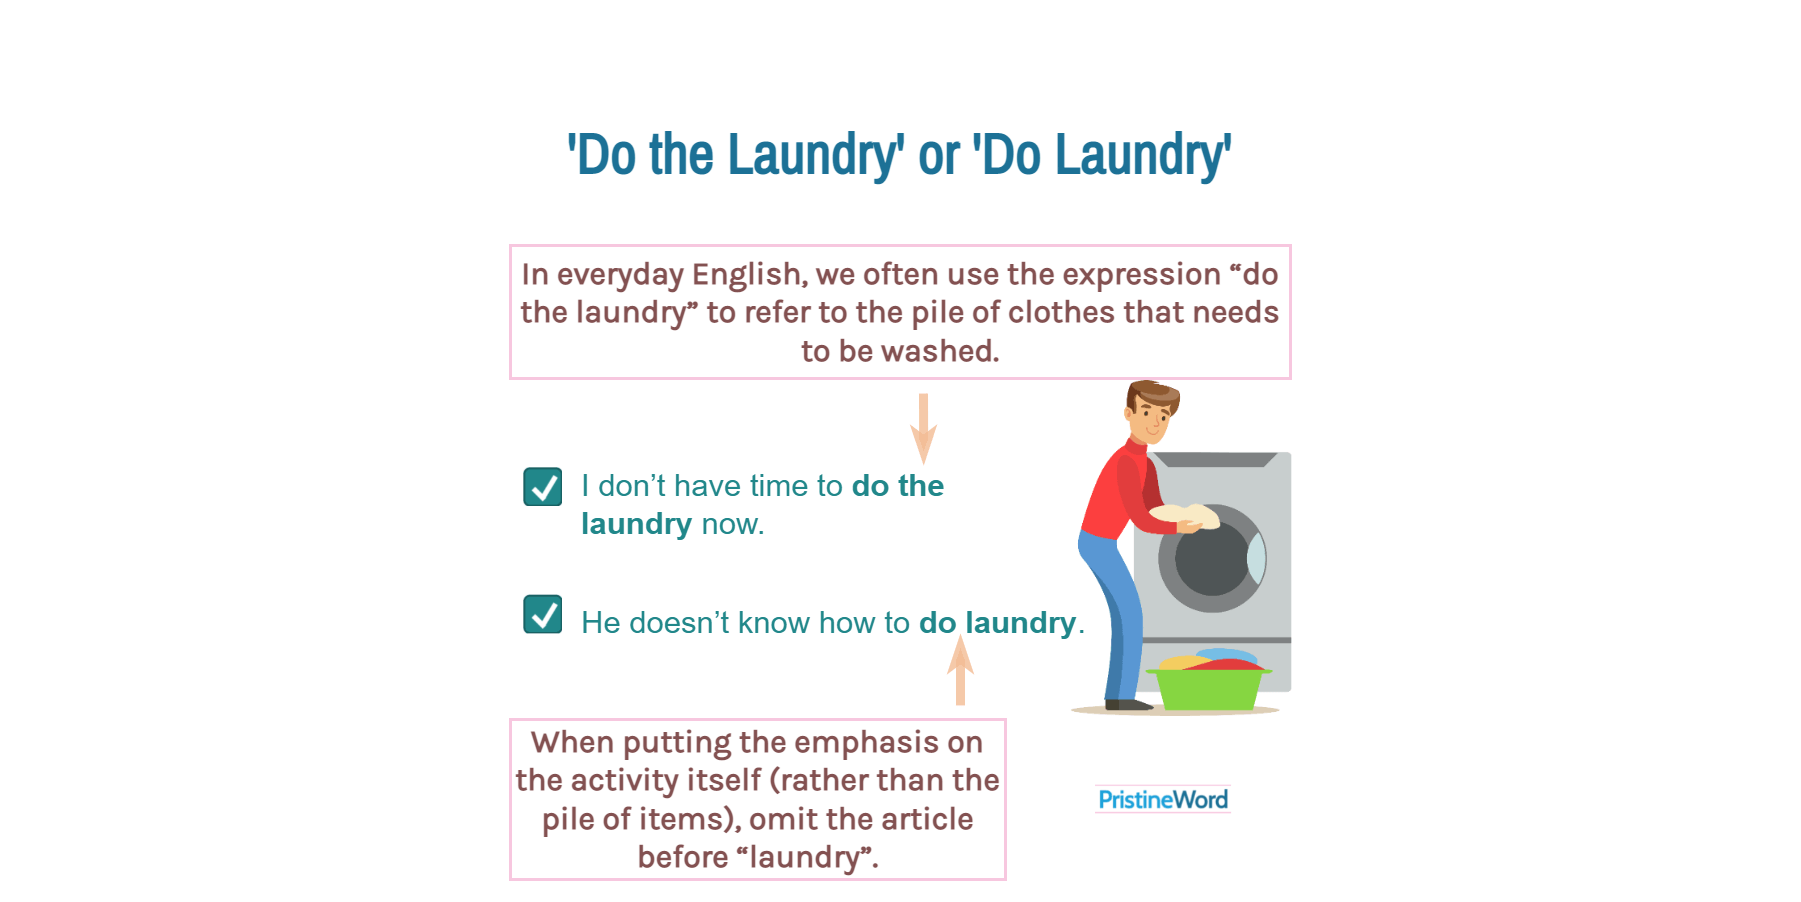 ‘Do Laundry’ or ‘Do the Laundry’. Which is Correct?